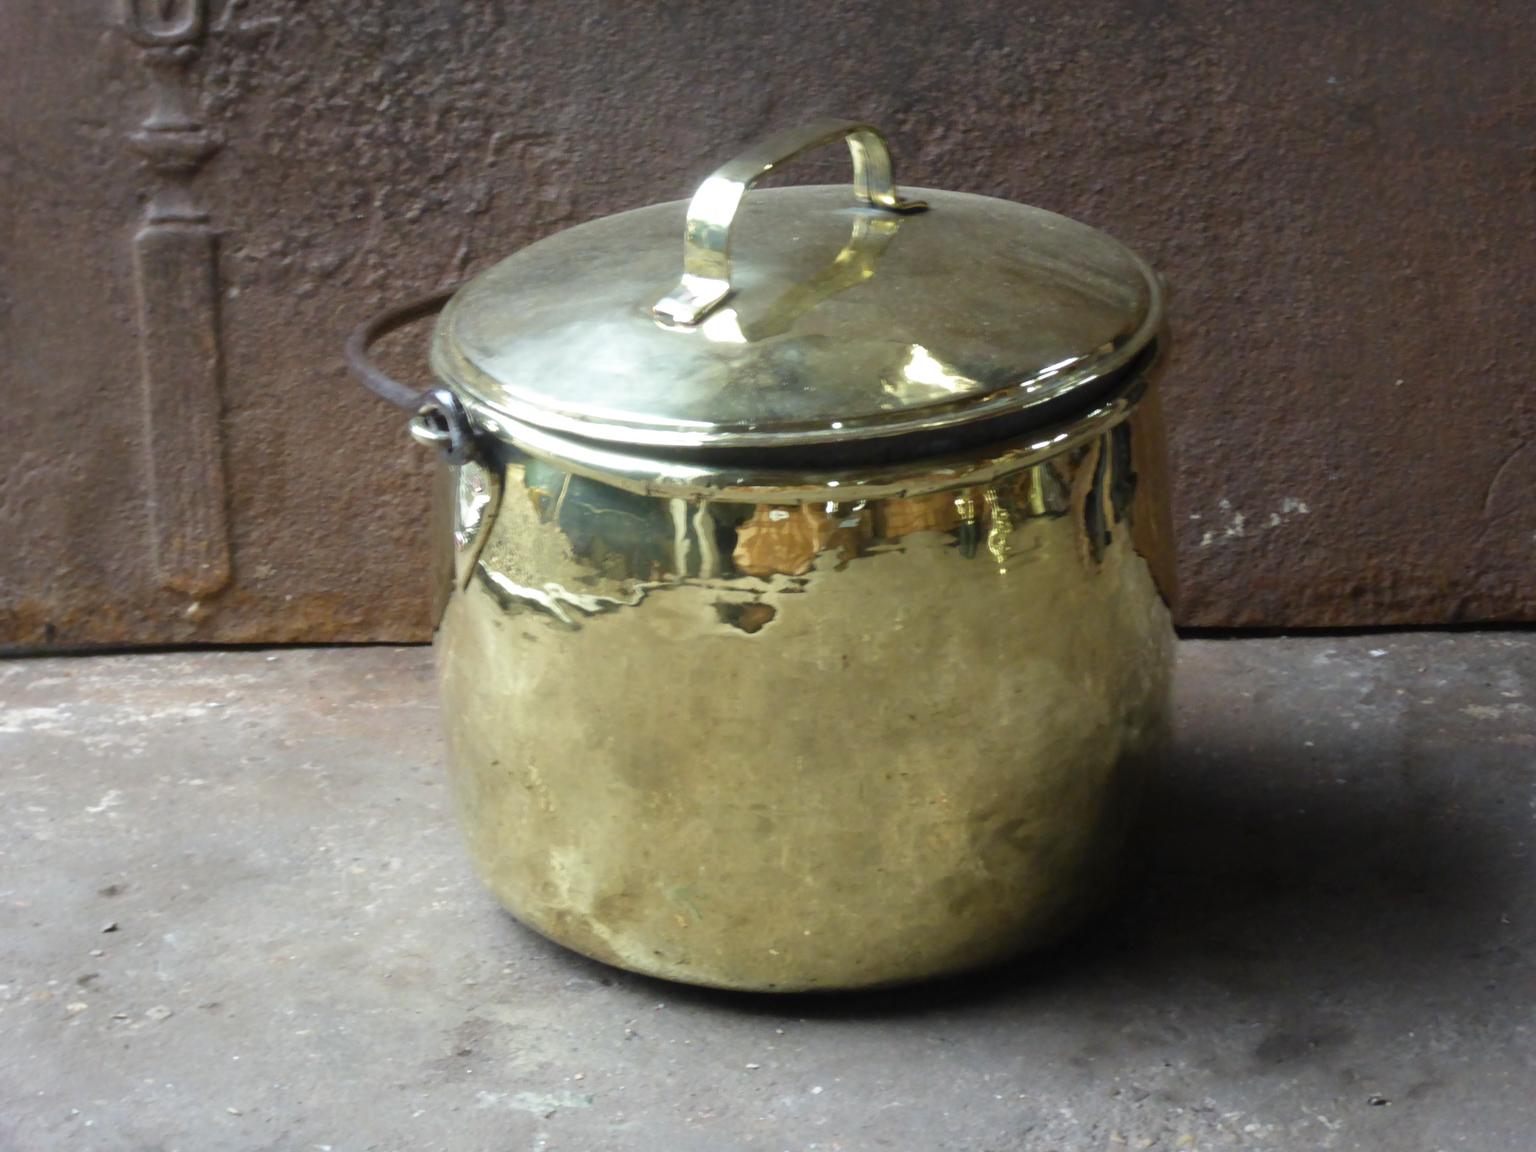 18th century Dutch log bin firewood bucket with lid made of polished brass. Dutch brass kettle, also called 'aker'. Used to draw water from the well and cook over an open fire. The condition of the basket is good.